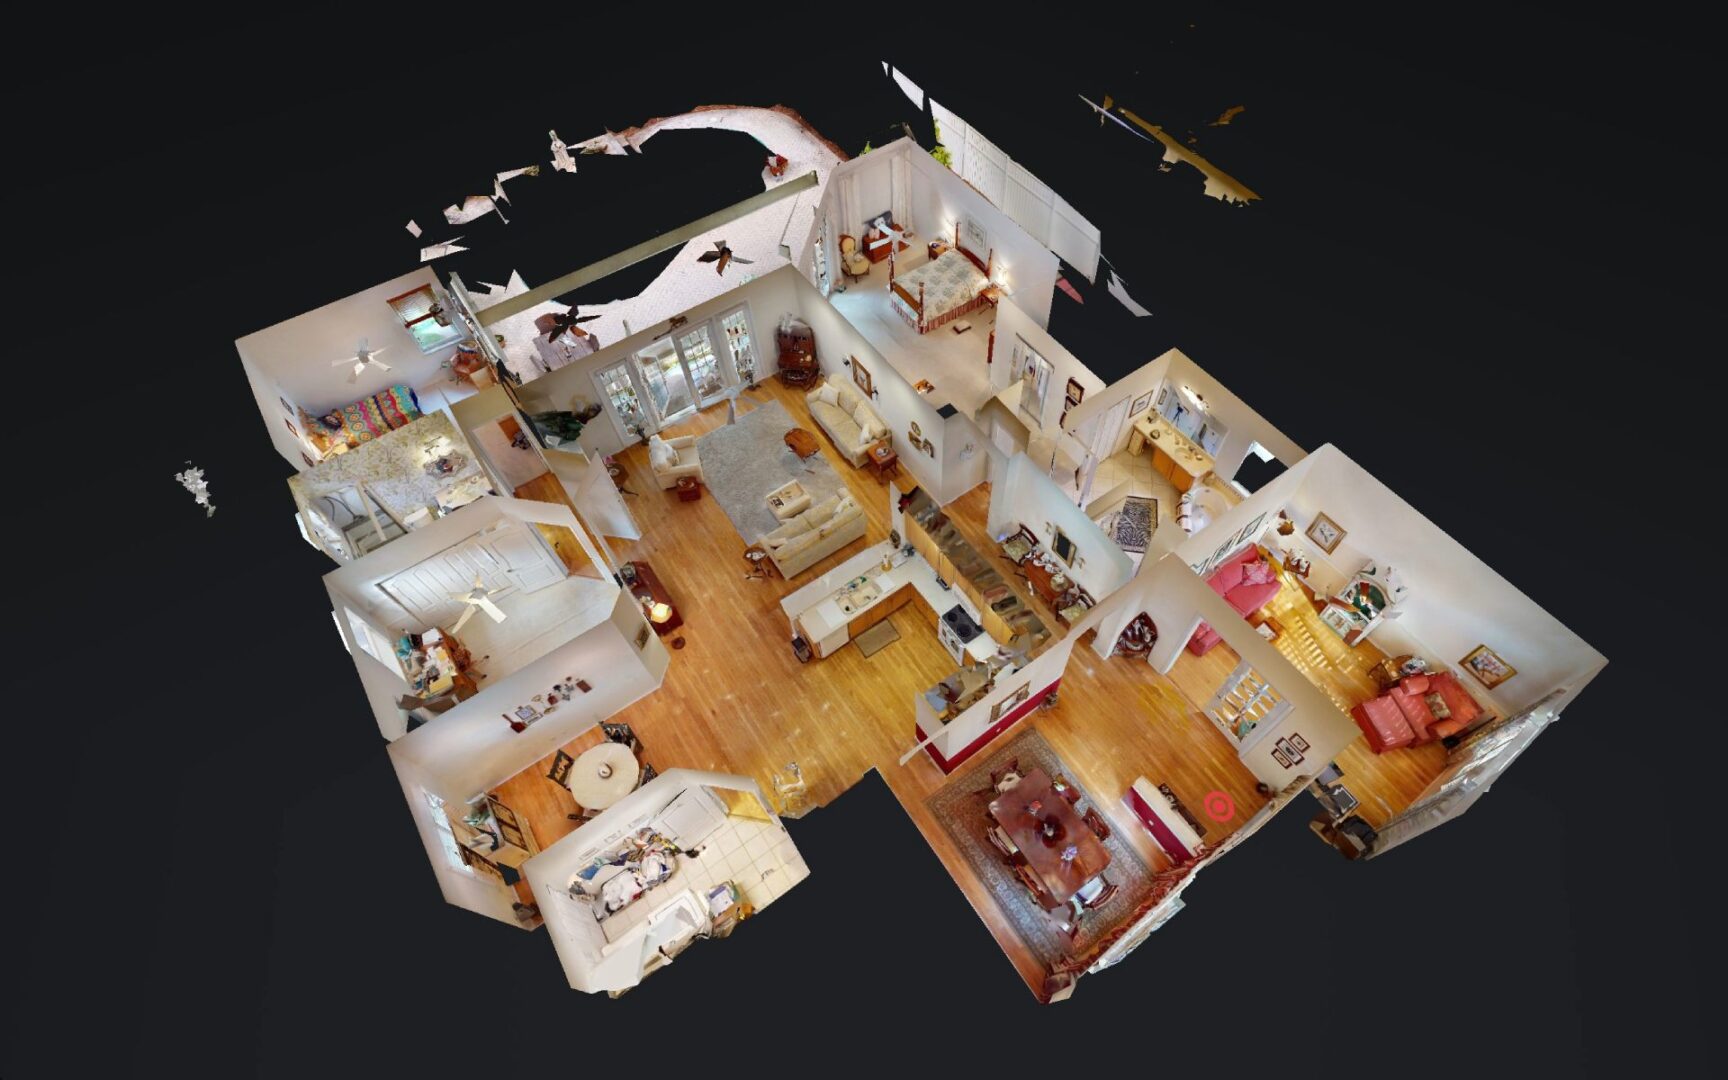 An aerial view of a house’s interior